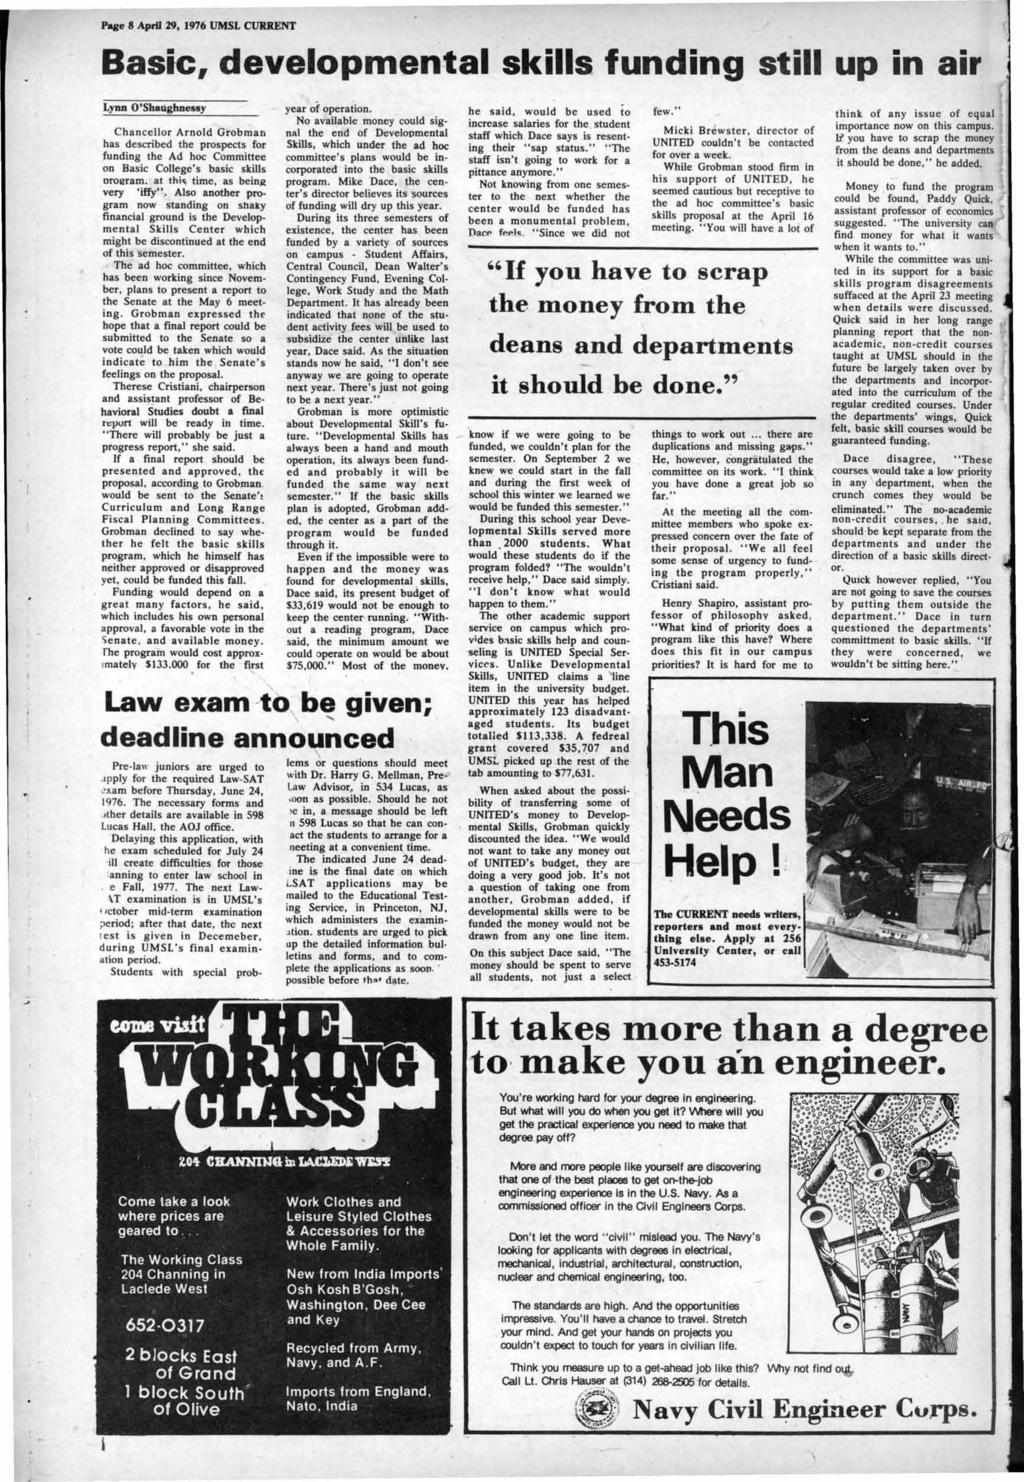 P-ae 8 April 29, 1976 UMSL CURRENT Basic, developmen tal skills funding still up In air Lynn O'Shaughnessy Chancellor Arnold Grobman has described the prospects for funding the Ad hoc Committee on